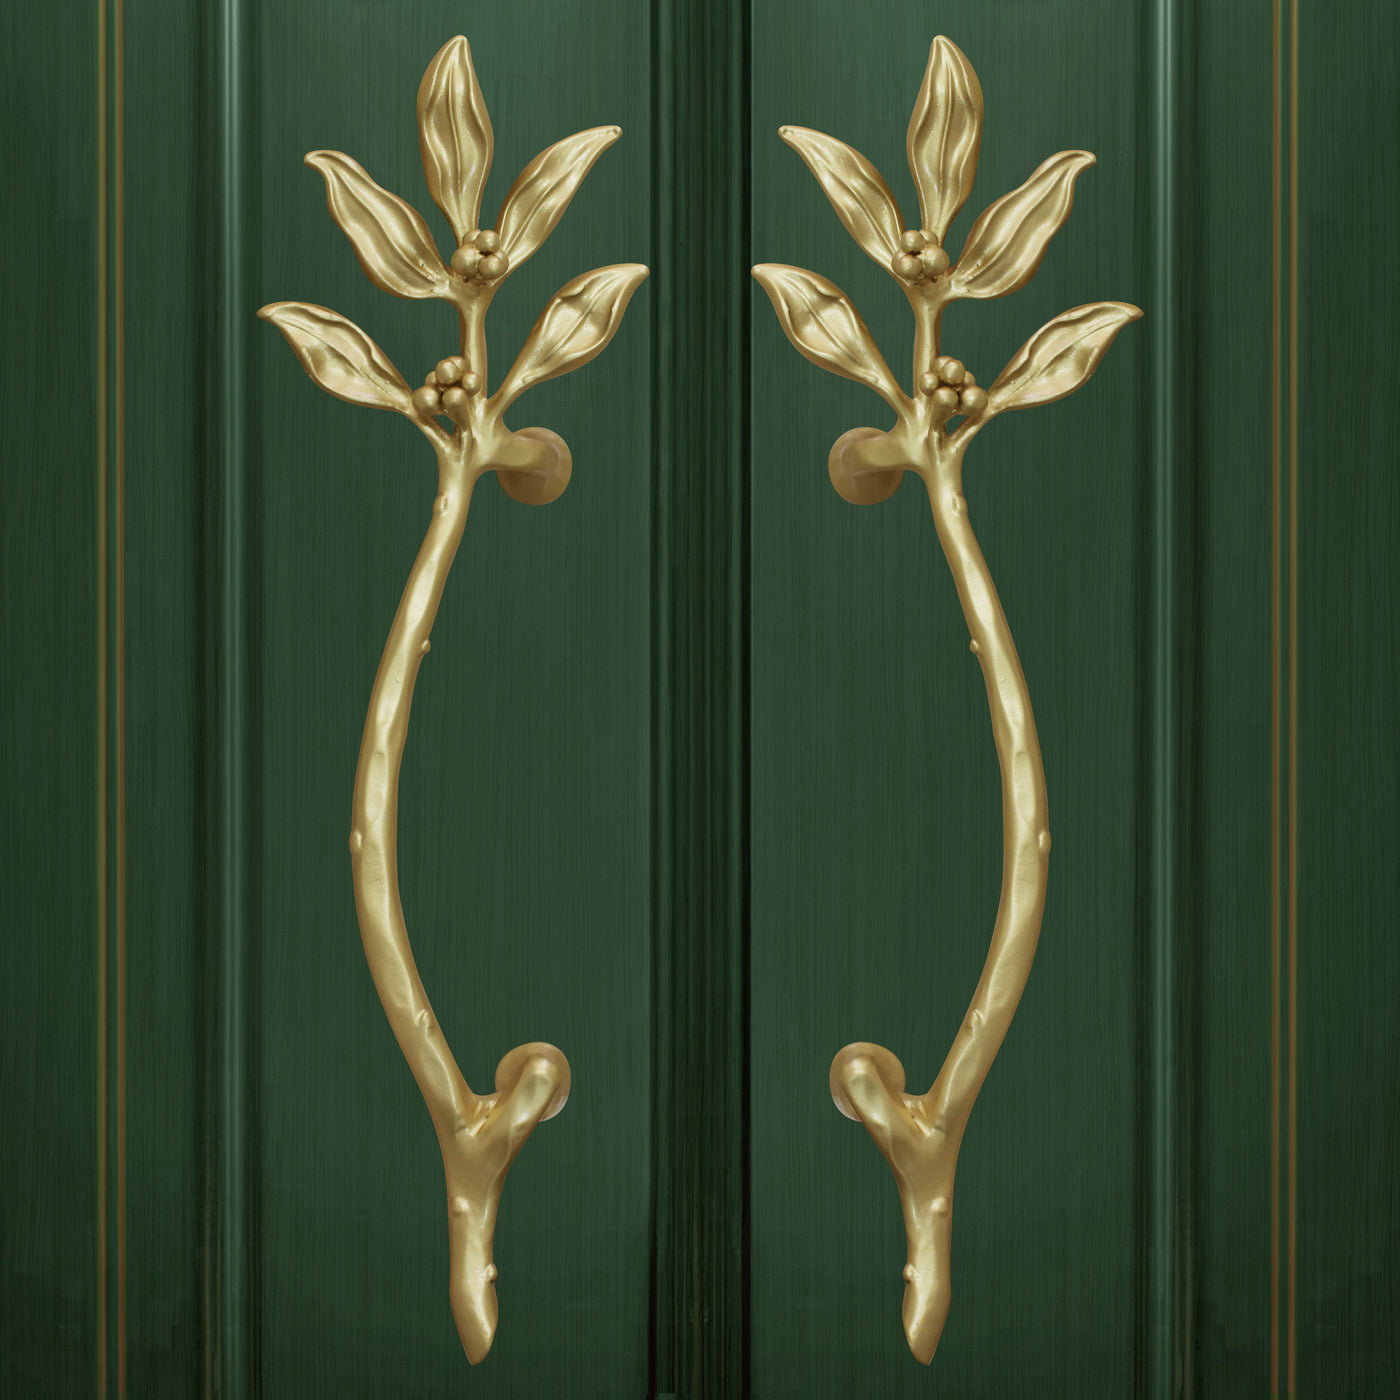 Decorative door handles with bay leaves painted in gold